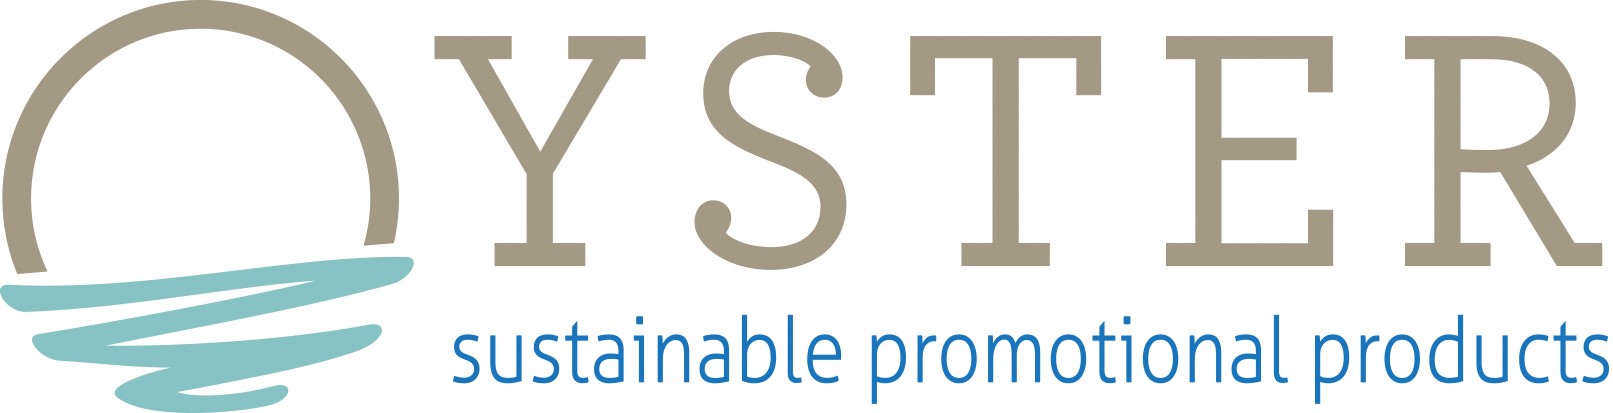 Oyster Sustainable Promotional Products